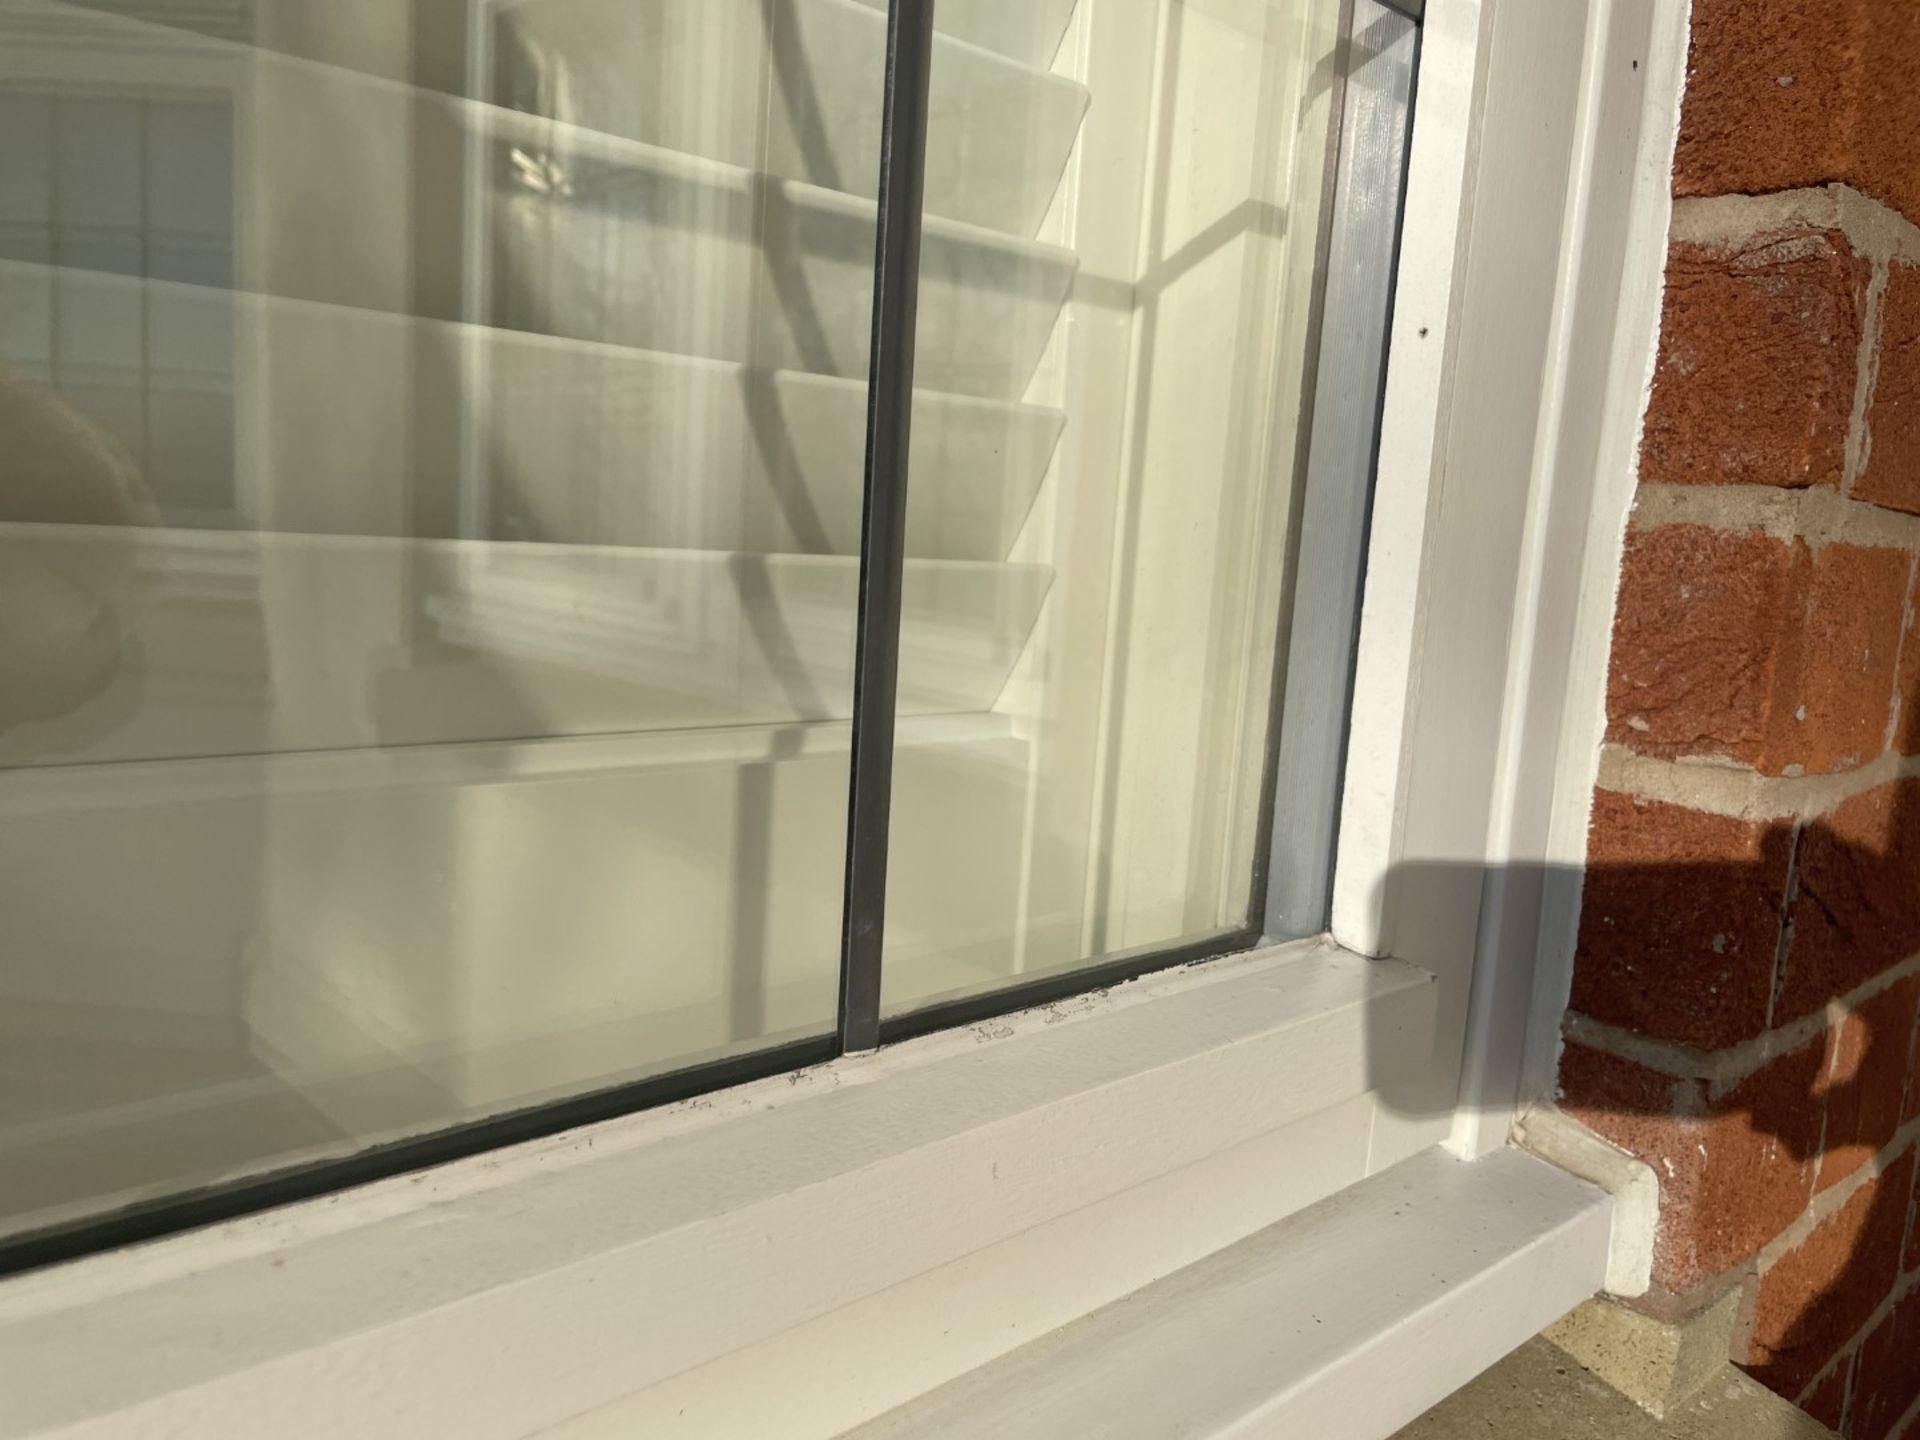 1 x Hardwood Timber Double Glazed Window Frames fitted with Shutter Blinds, In White - Ref: PAN106 - Image 19 of 23